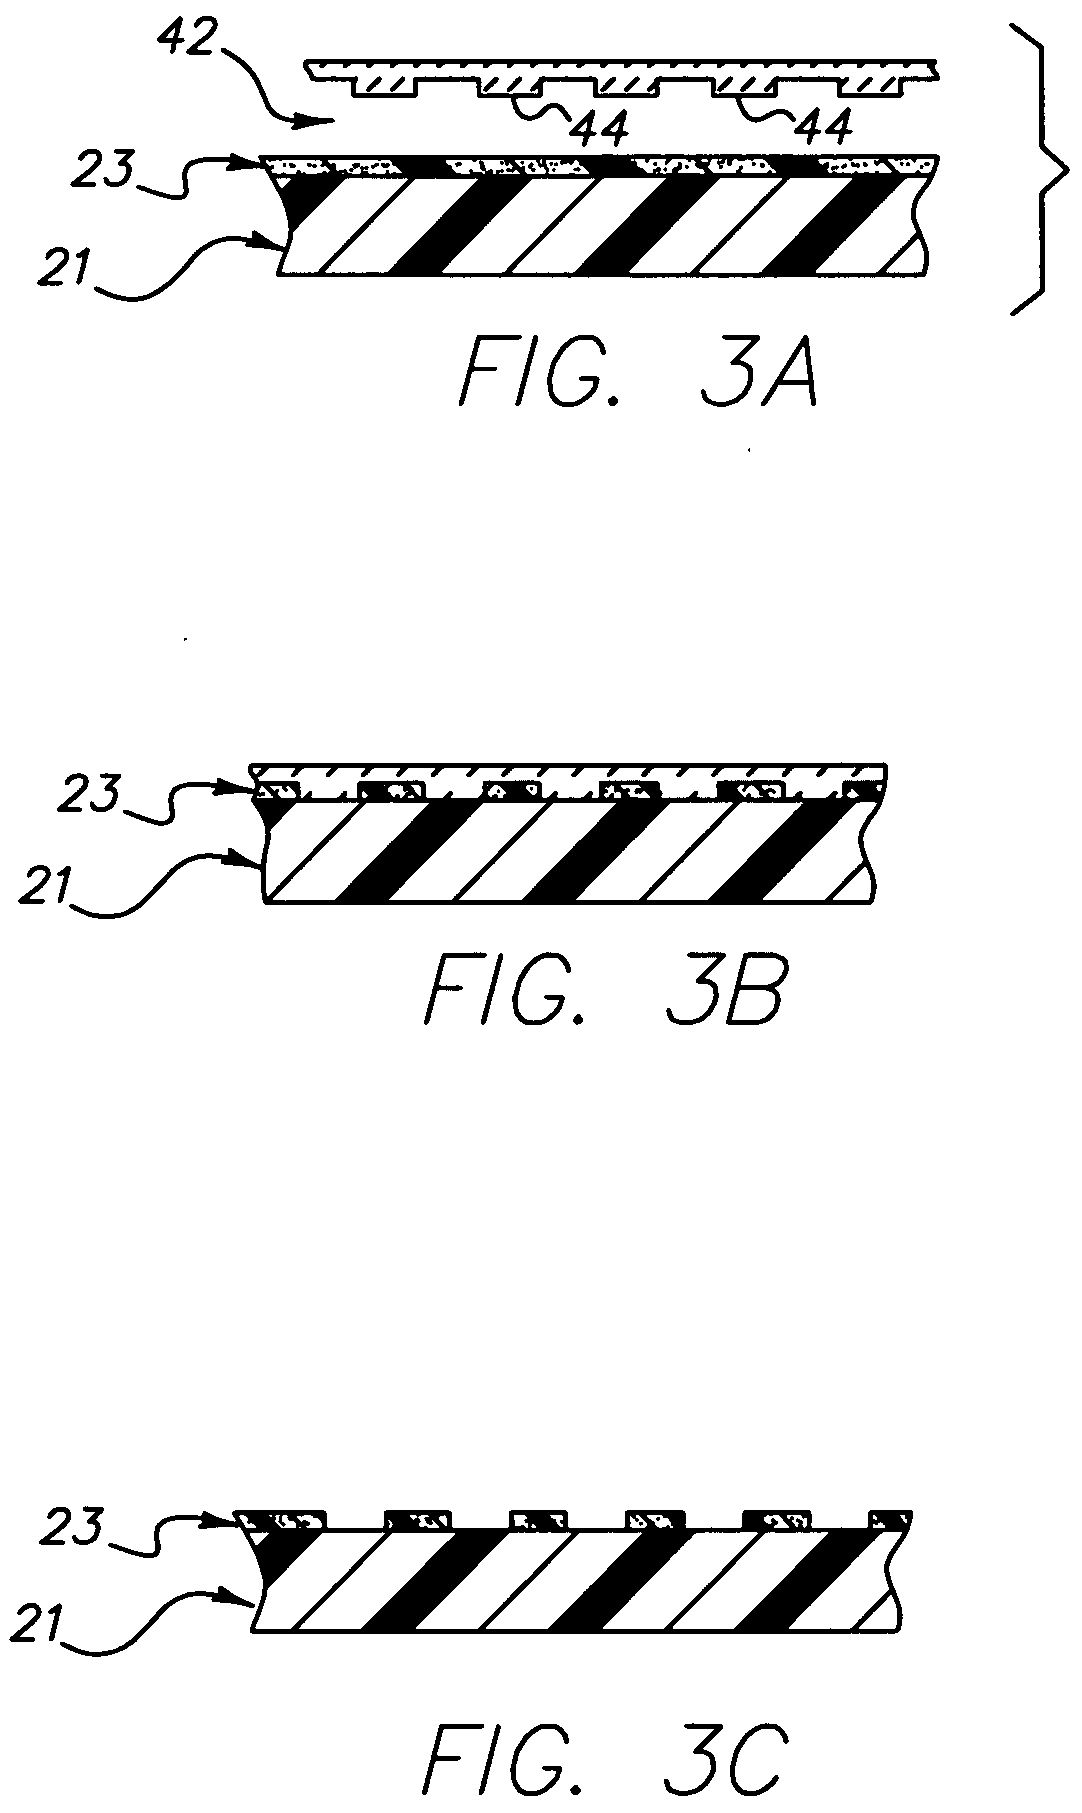 Method of making a circuitized substrate having at least one capacitor therein